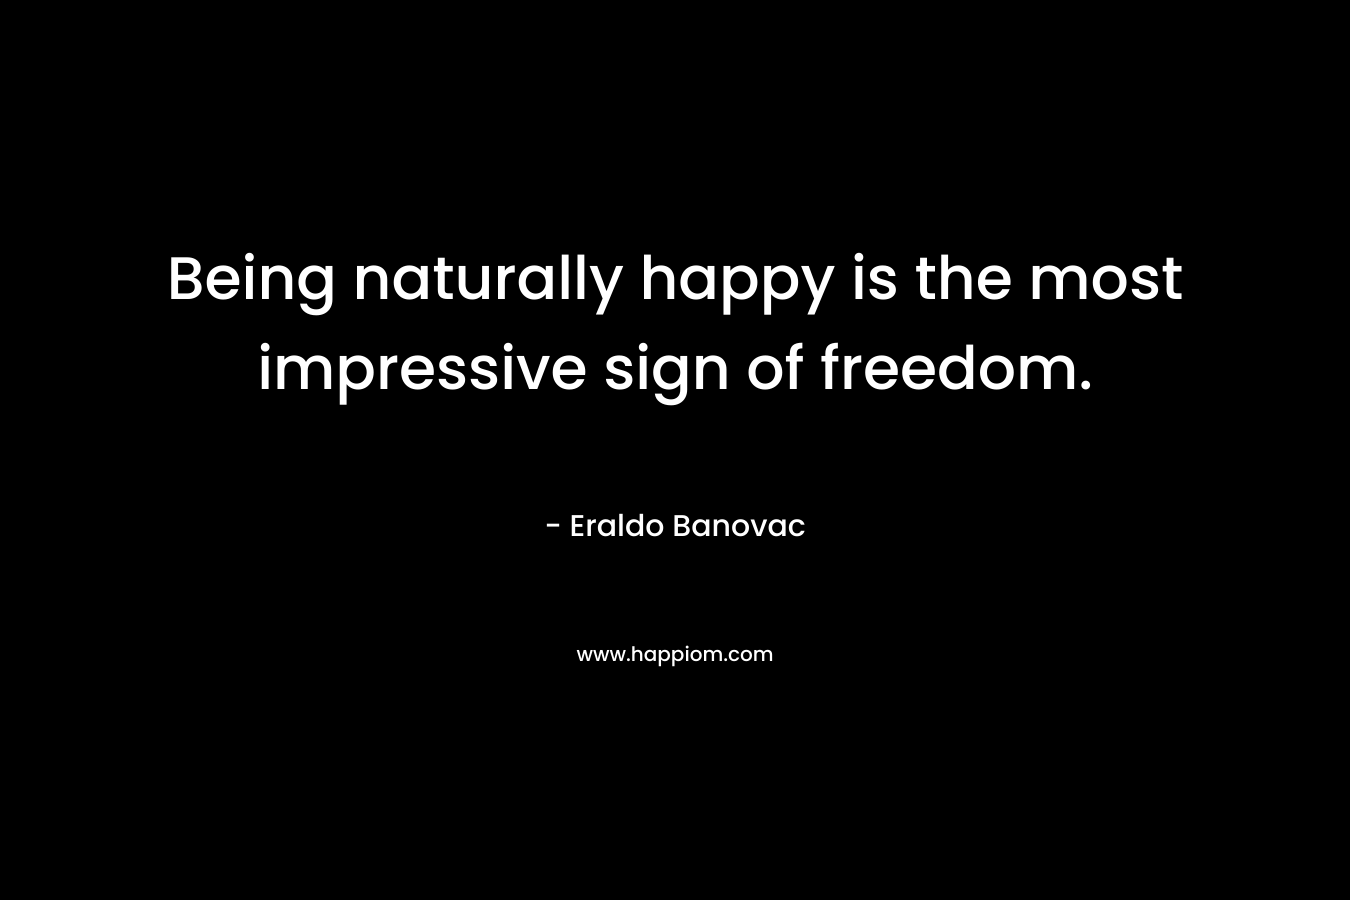 Being naturally happy is the most impressive sign of freedom.